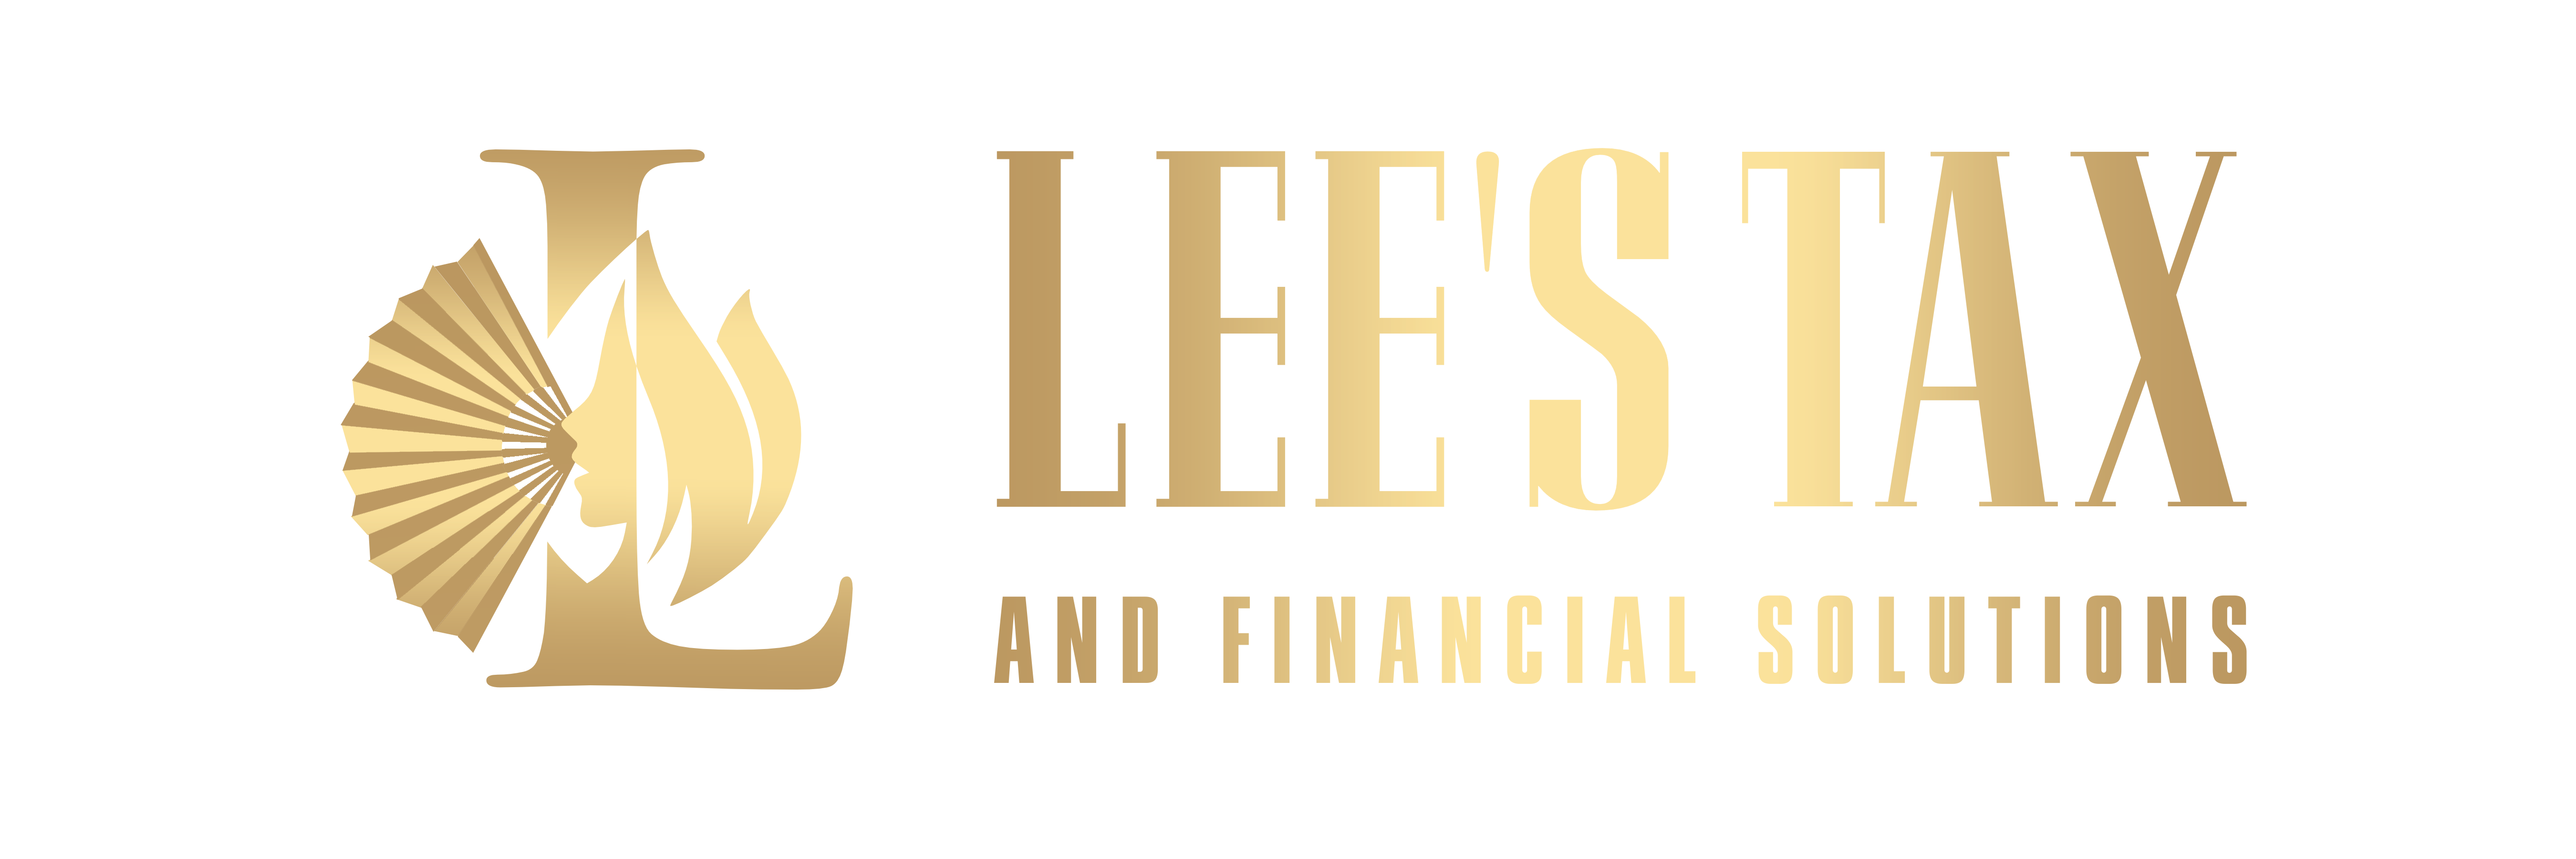 tax-accounting-services-lee-s-tax-service